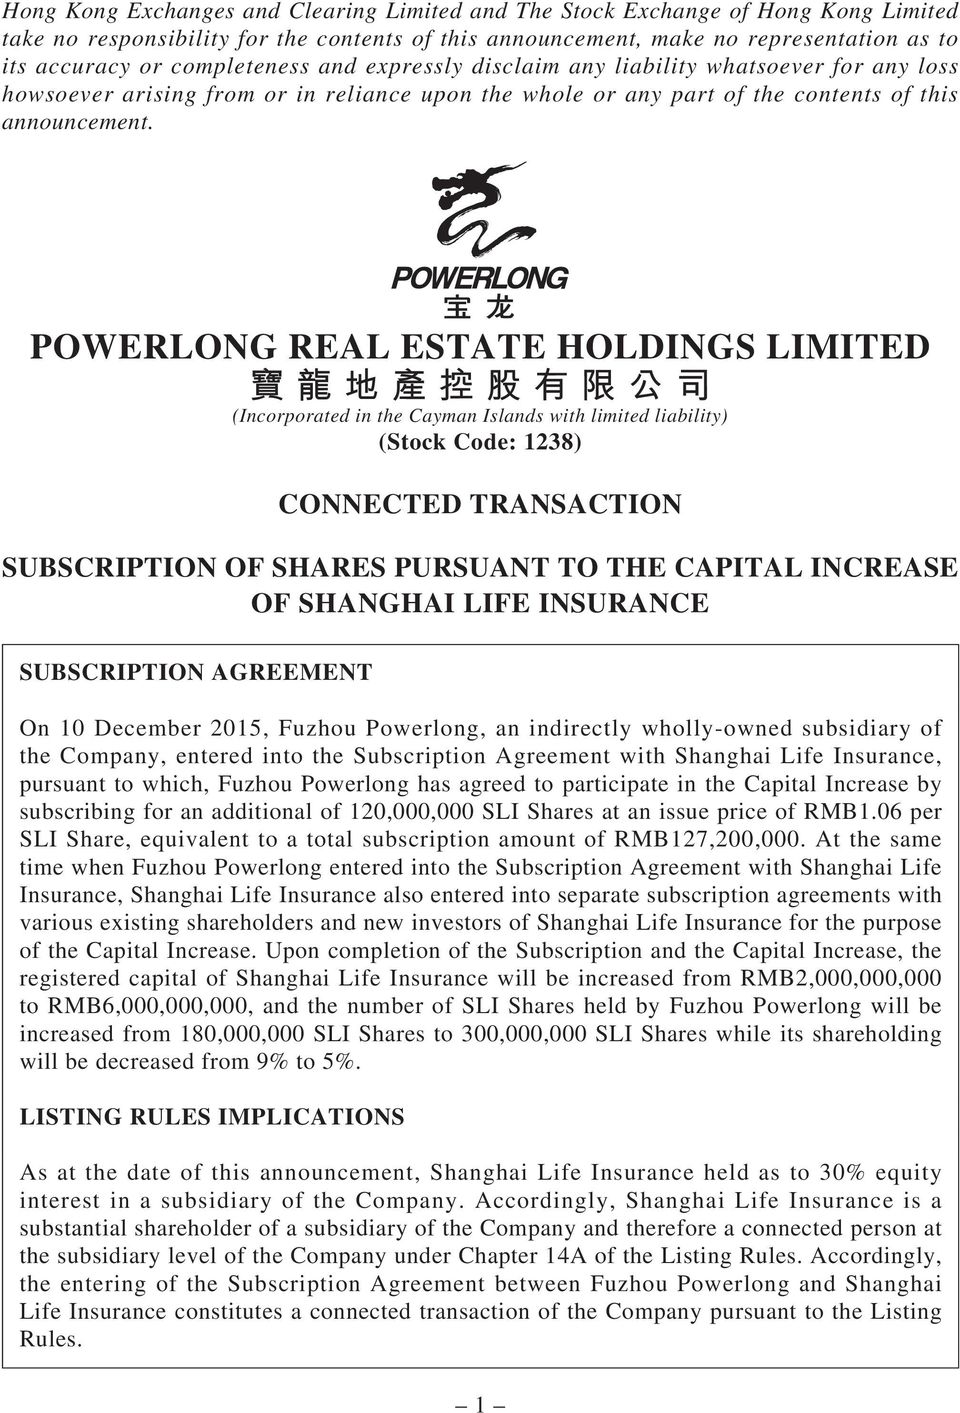 POWERLONG REAL ESTATE HOLDINGS LIMITED (Incorporated in the Cayman Islands with limited liability) (Stock Code: 1238) CONNECTED TRANSACTION SUBSCRIPTION OF SHARES PURSUANT TO THE CAPITAL INCREASE OF